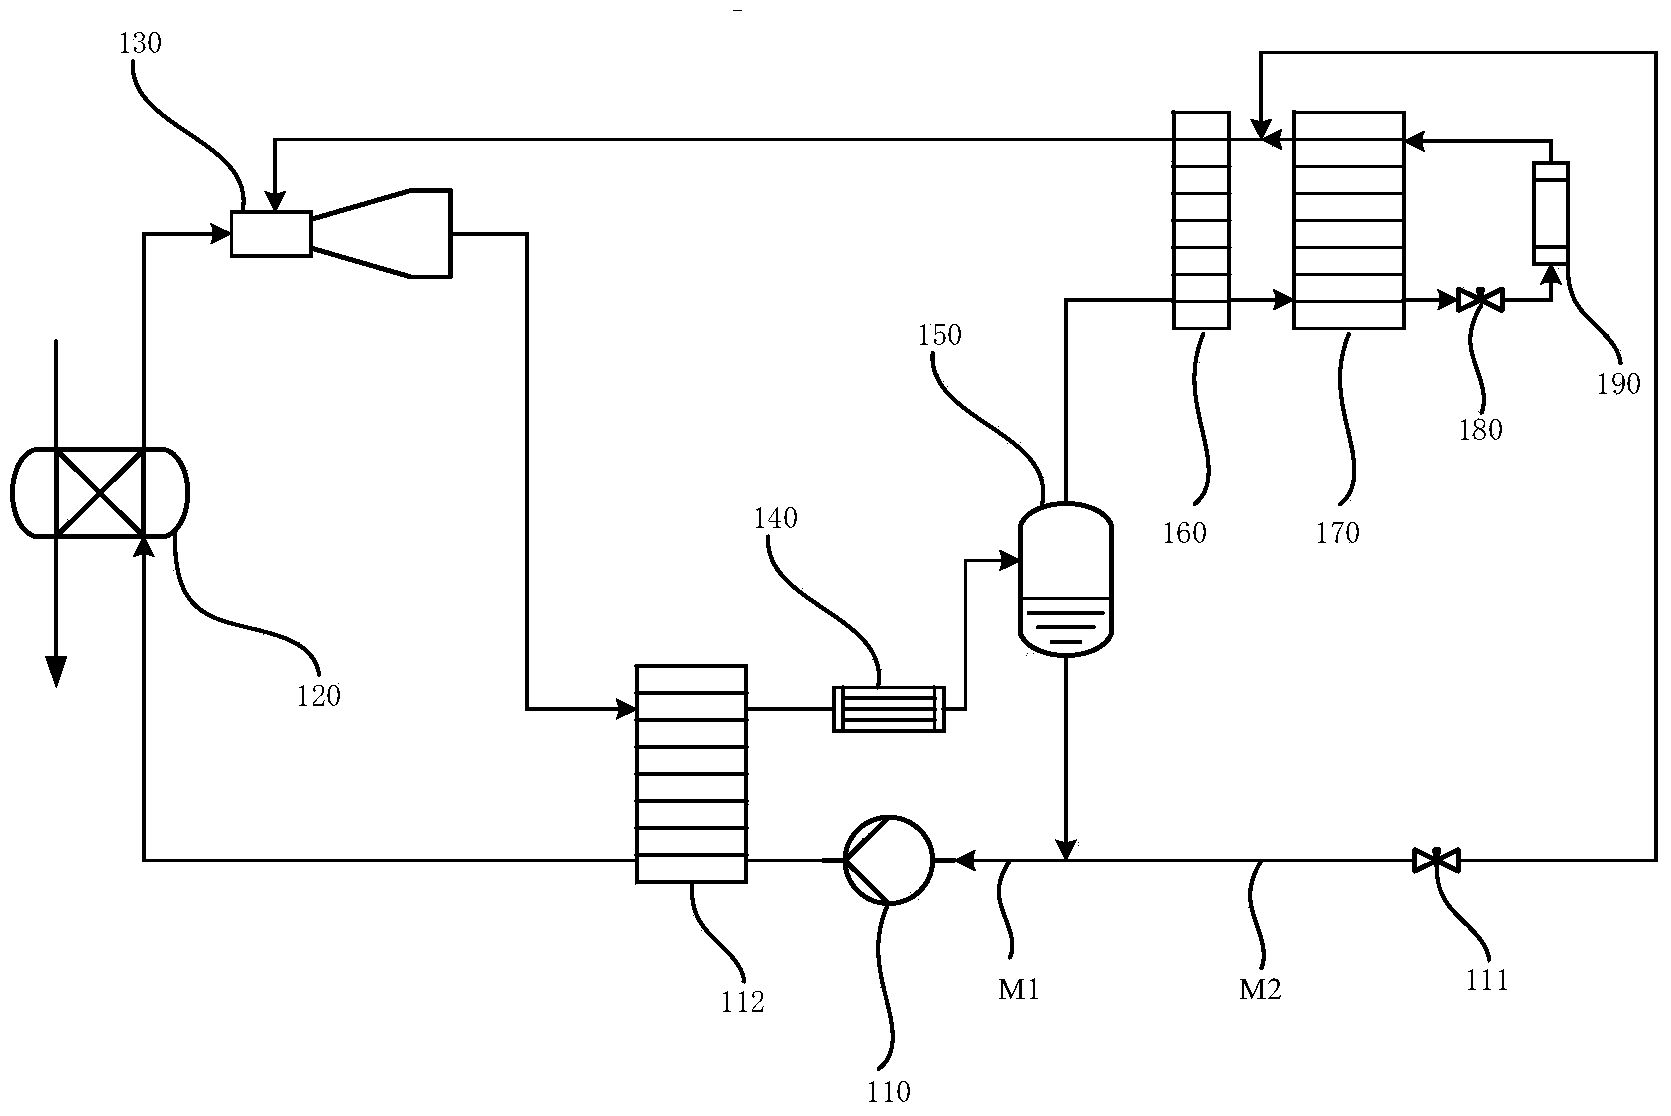 Mixed working medium low-temperature refrigerating cycle system driving ejector through waste heat